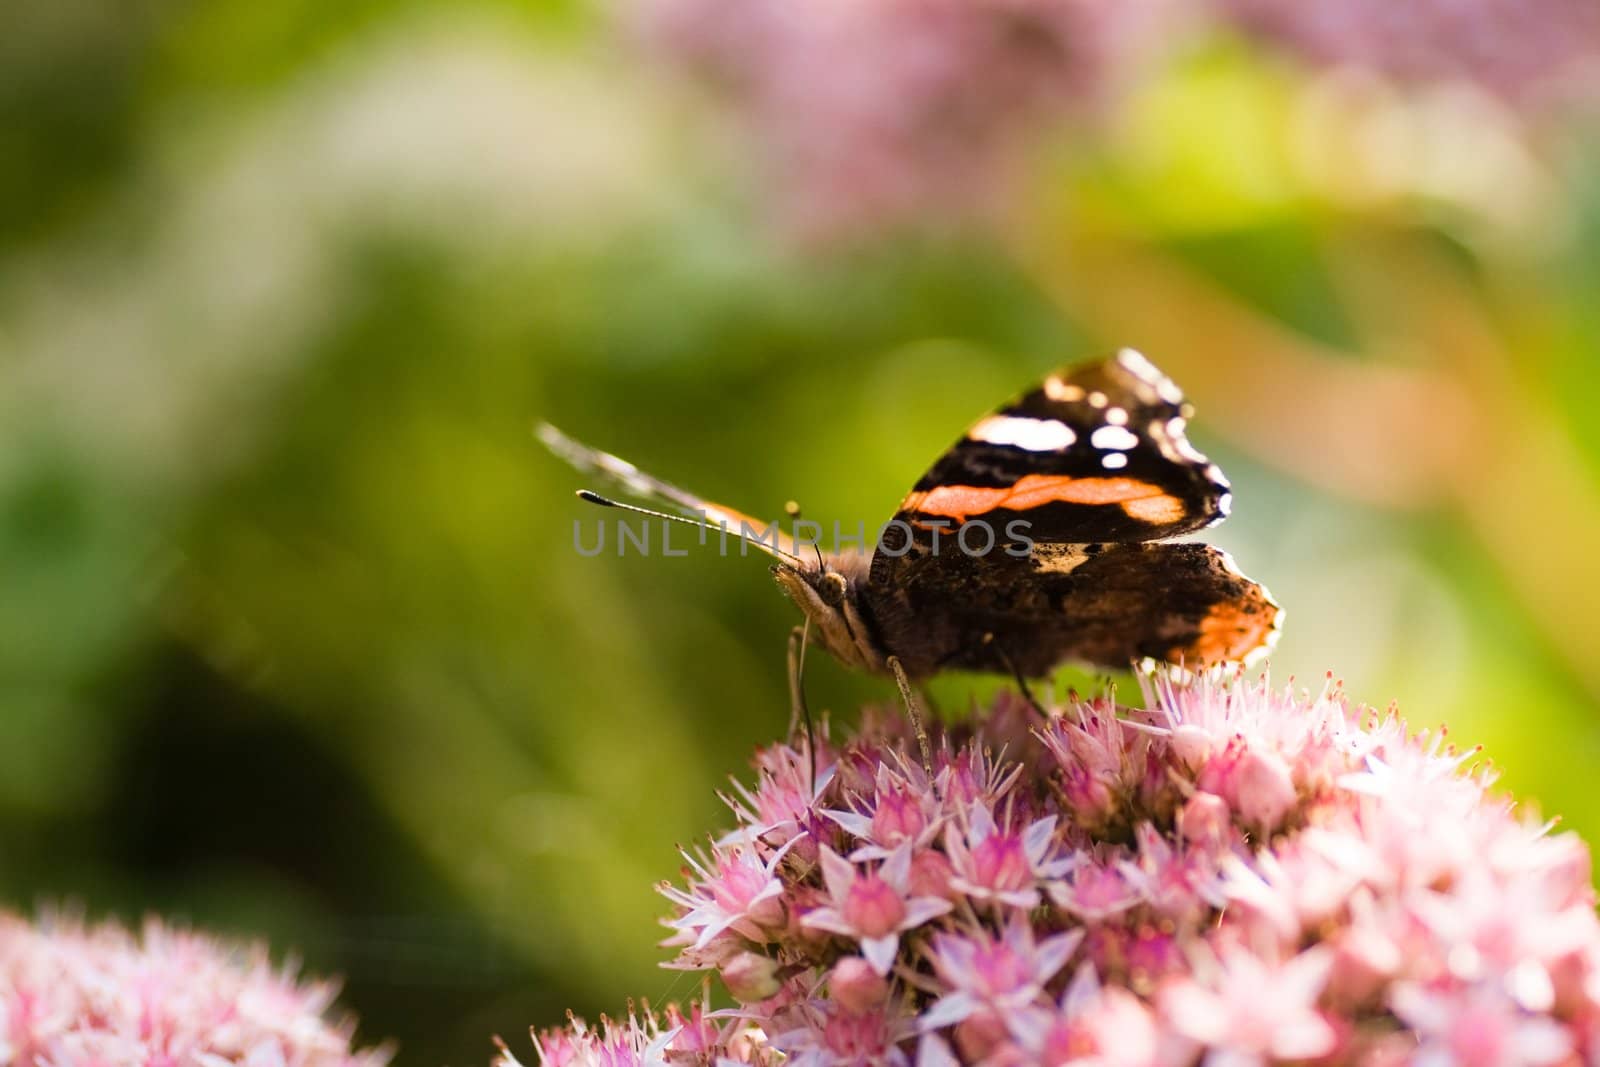 Red admiral getting nectar from sedum flowers